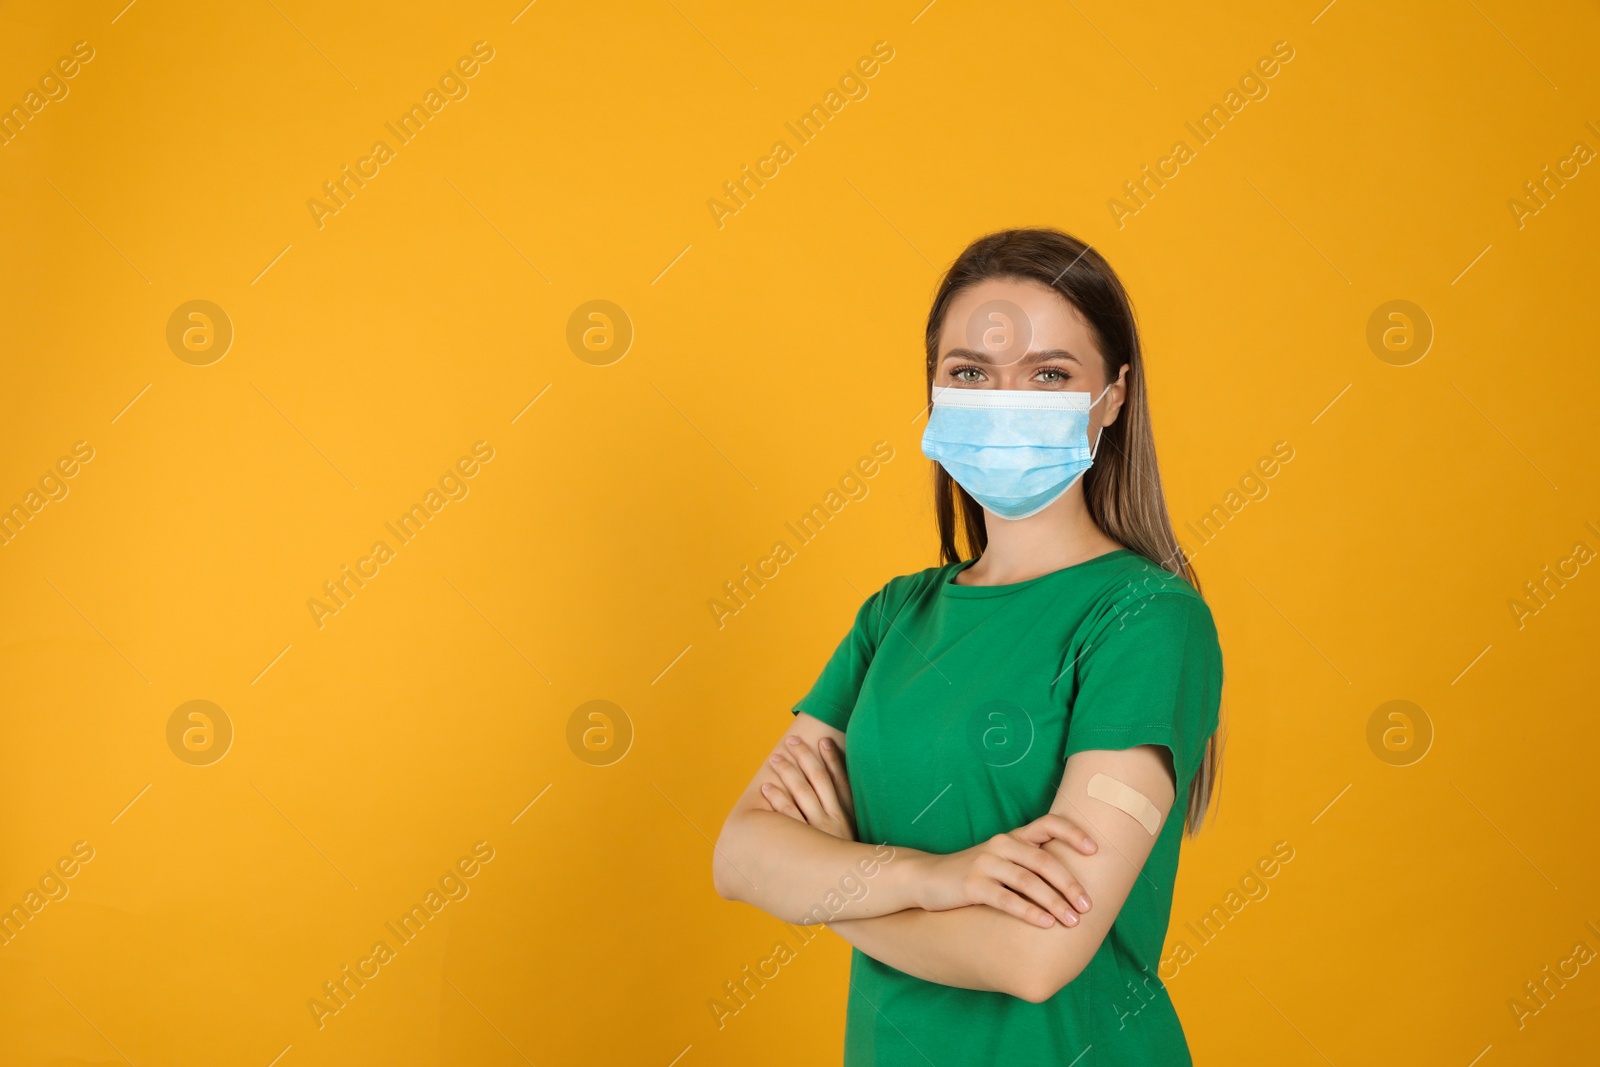 Photo of Vaccinated woman with protective mask and medical plaster on her arm against yellow background. Space for text